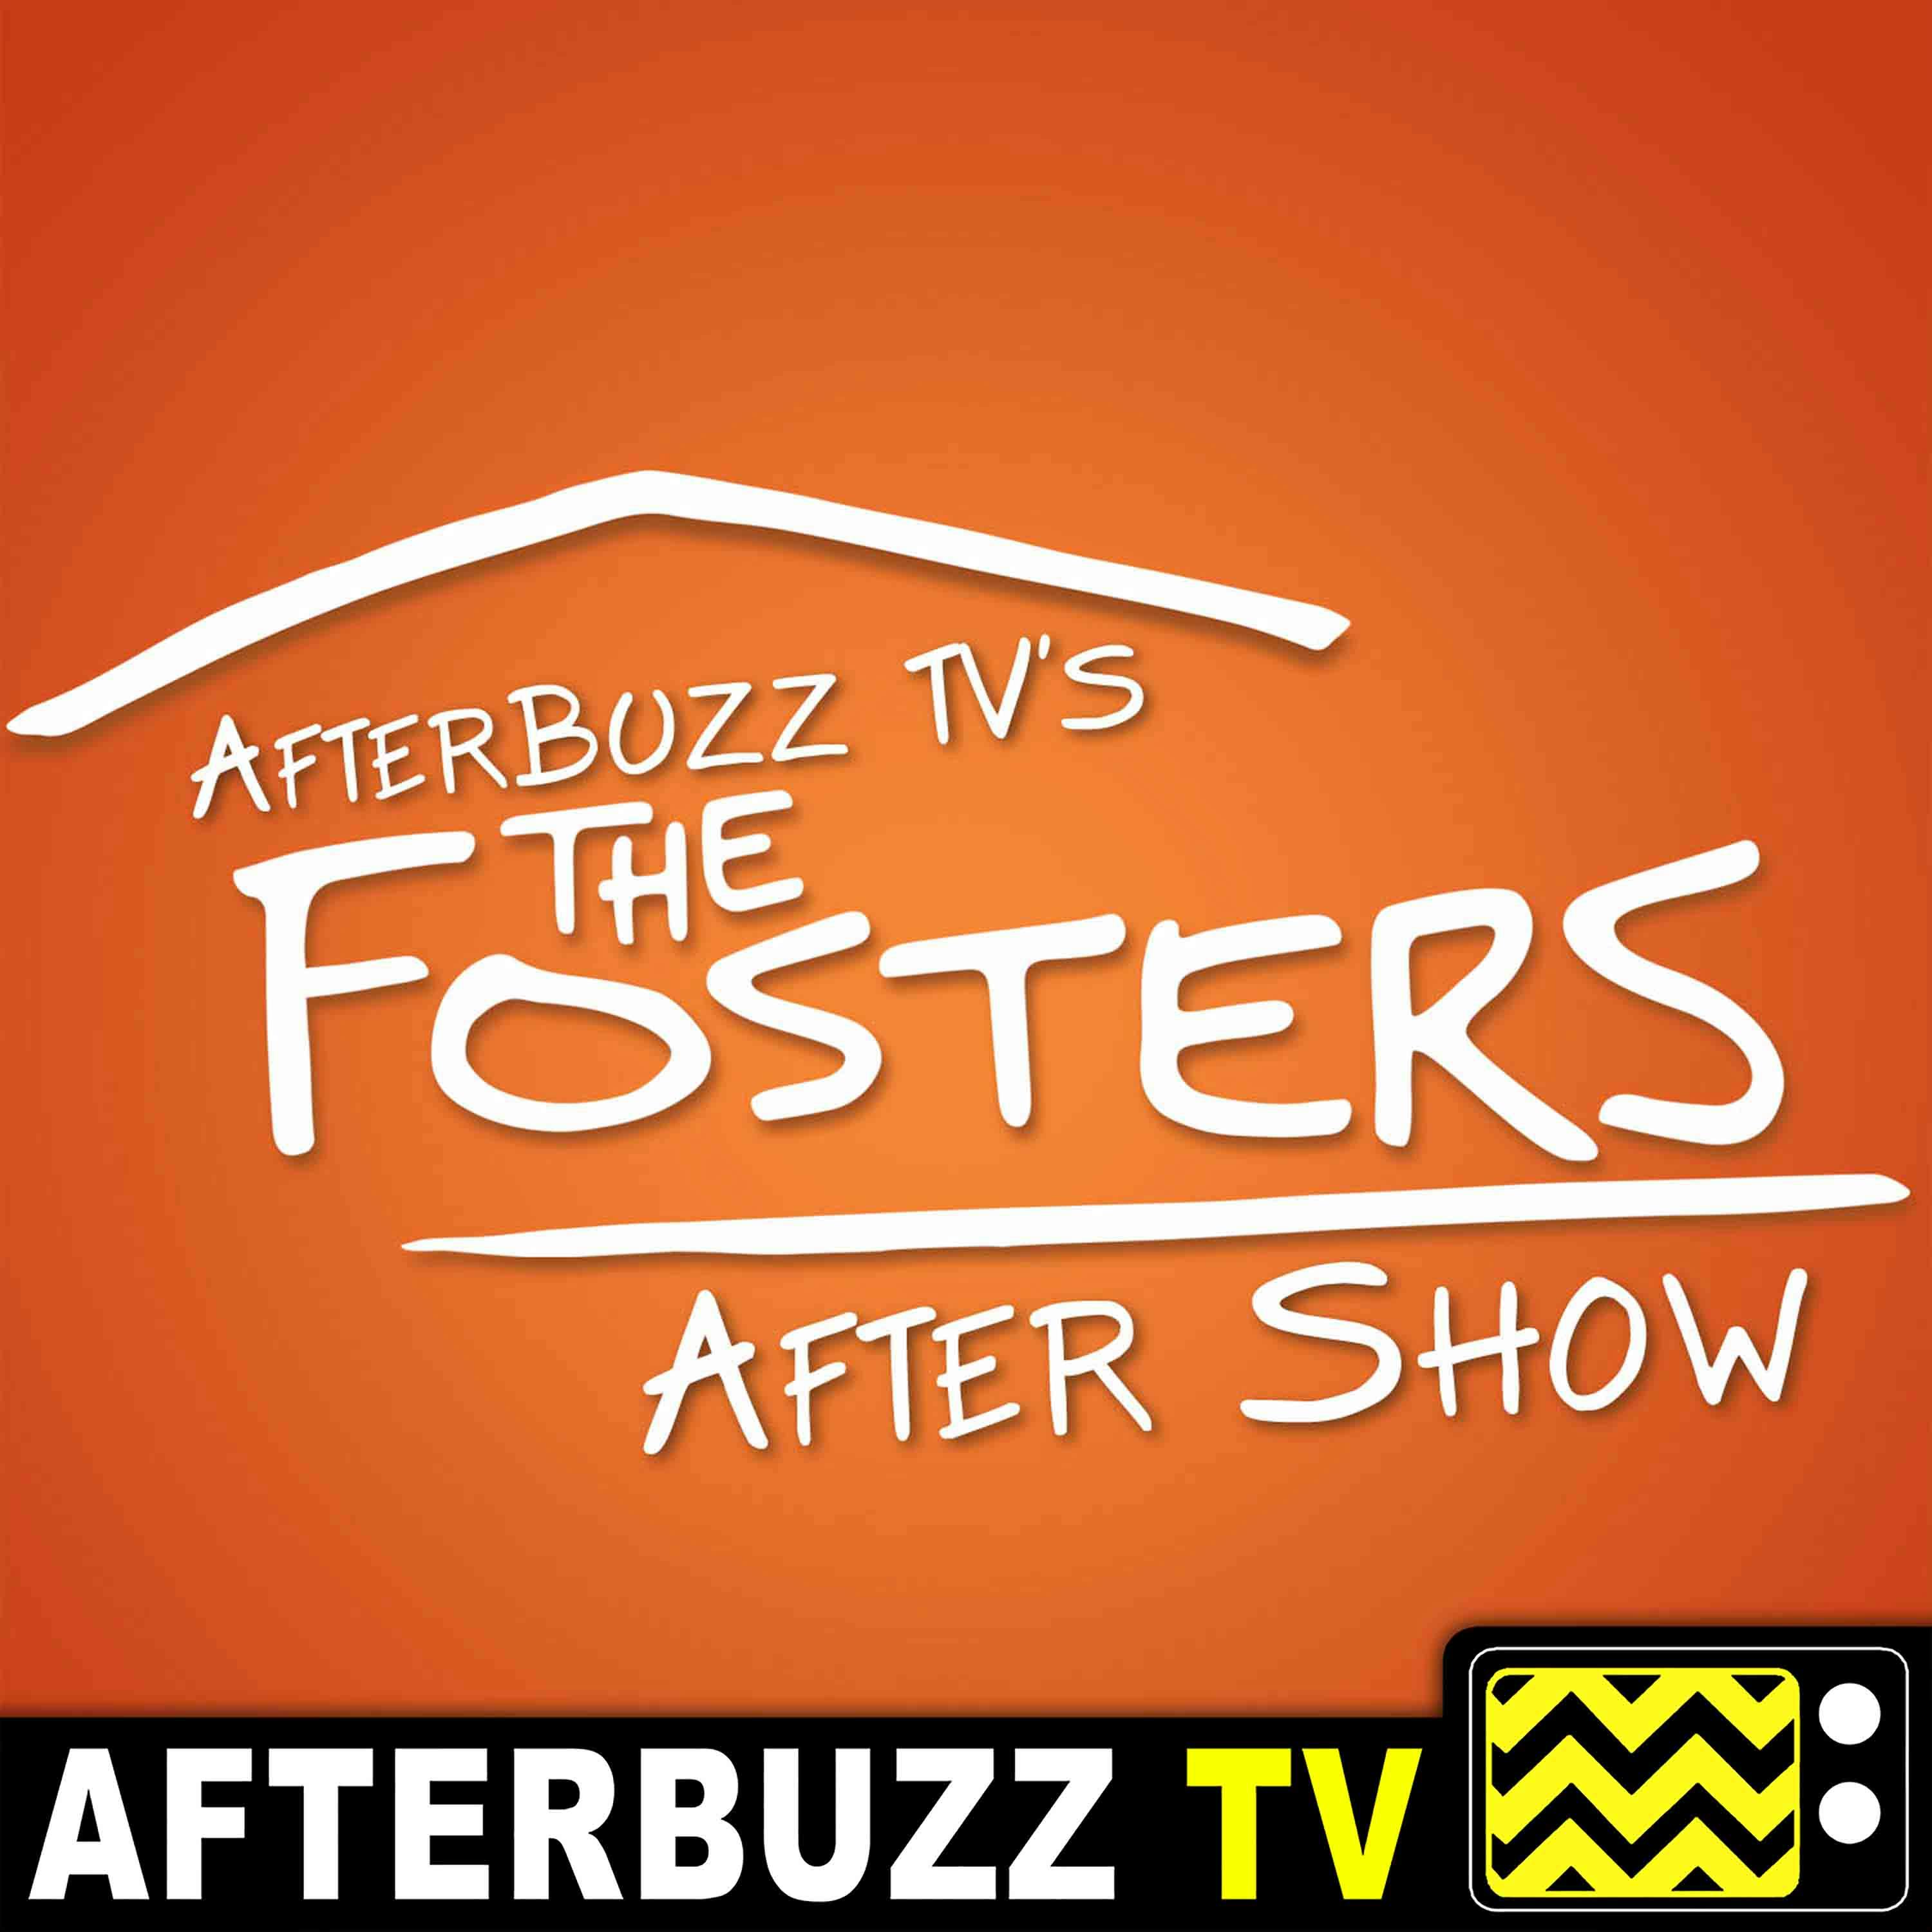 The Fosters S:4 | Annika Marks Guests On Forty E:5 | AfterBuzz TV AfterShow